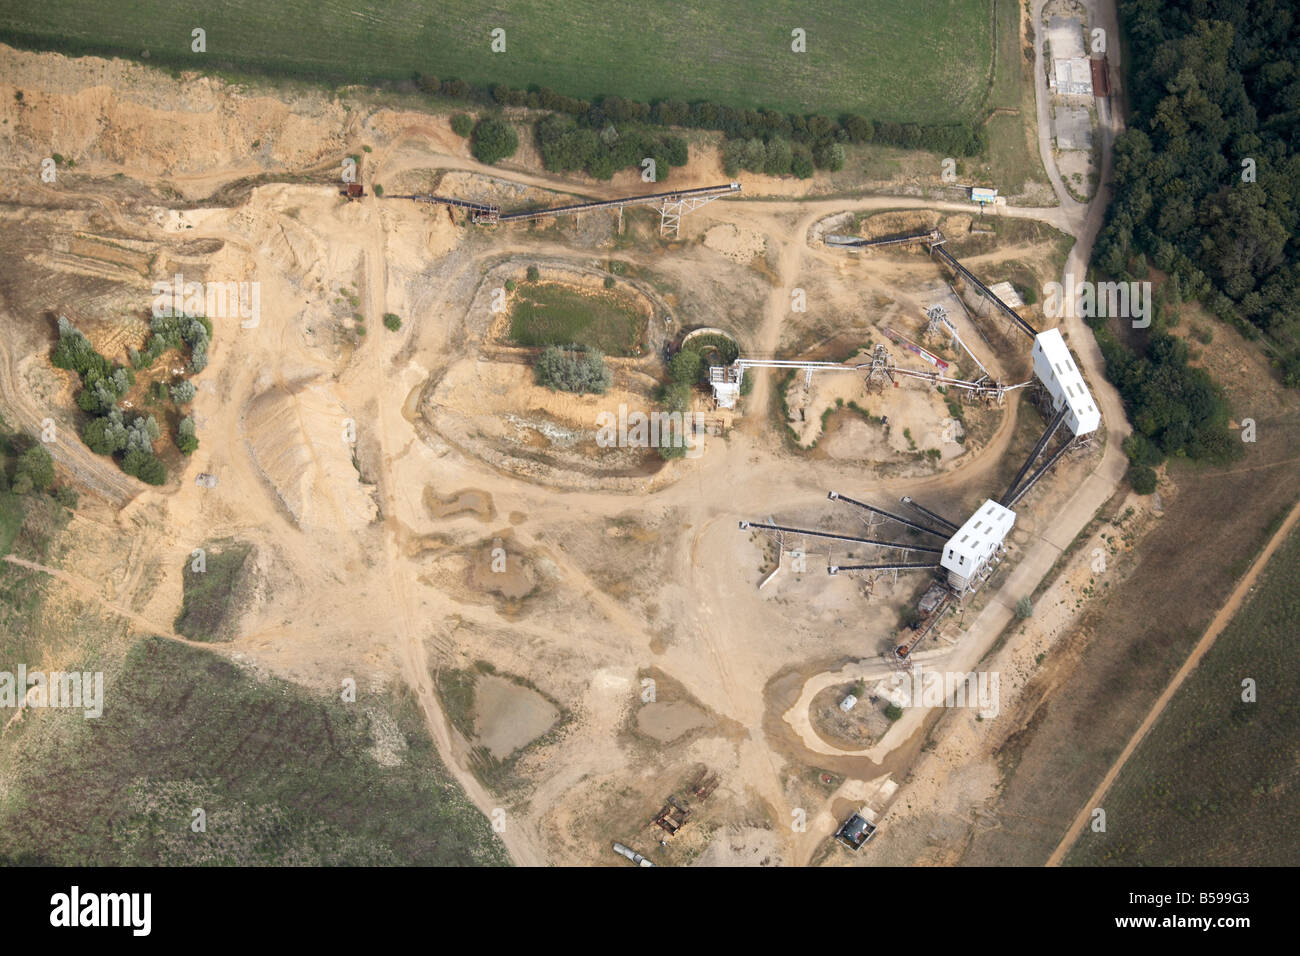 Aerial view east of construction site excavation work sand pit off Wadesmill Road Hertfordshire England UK High level oblique Stock Photo